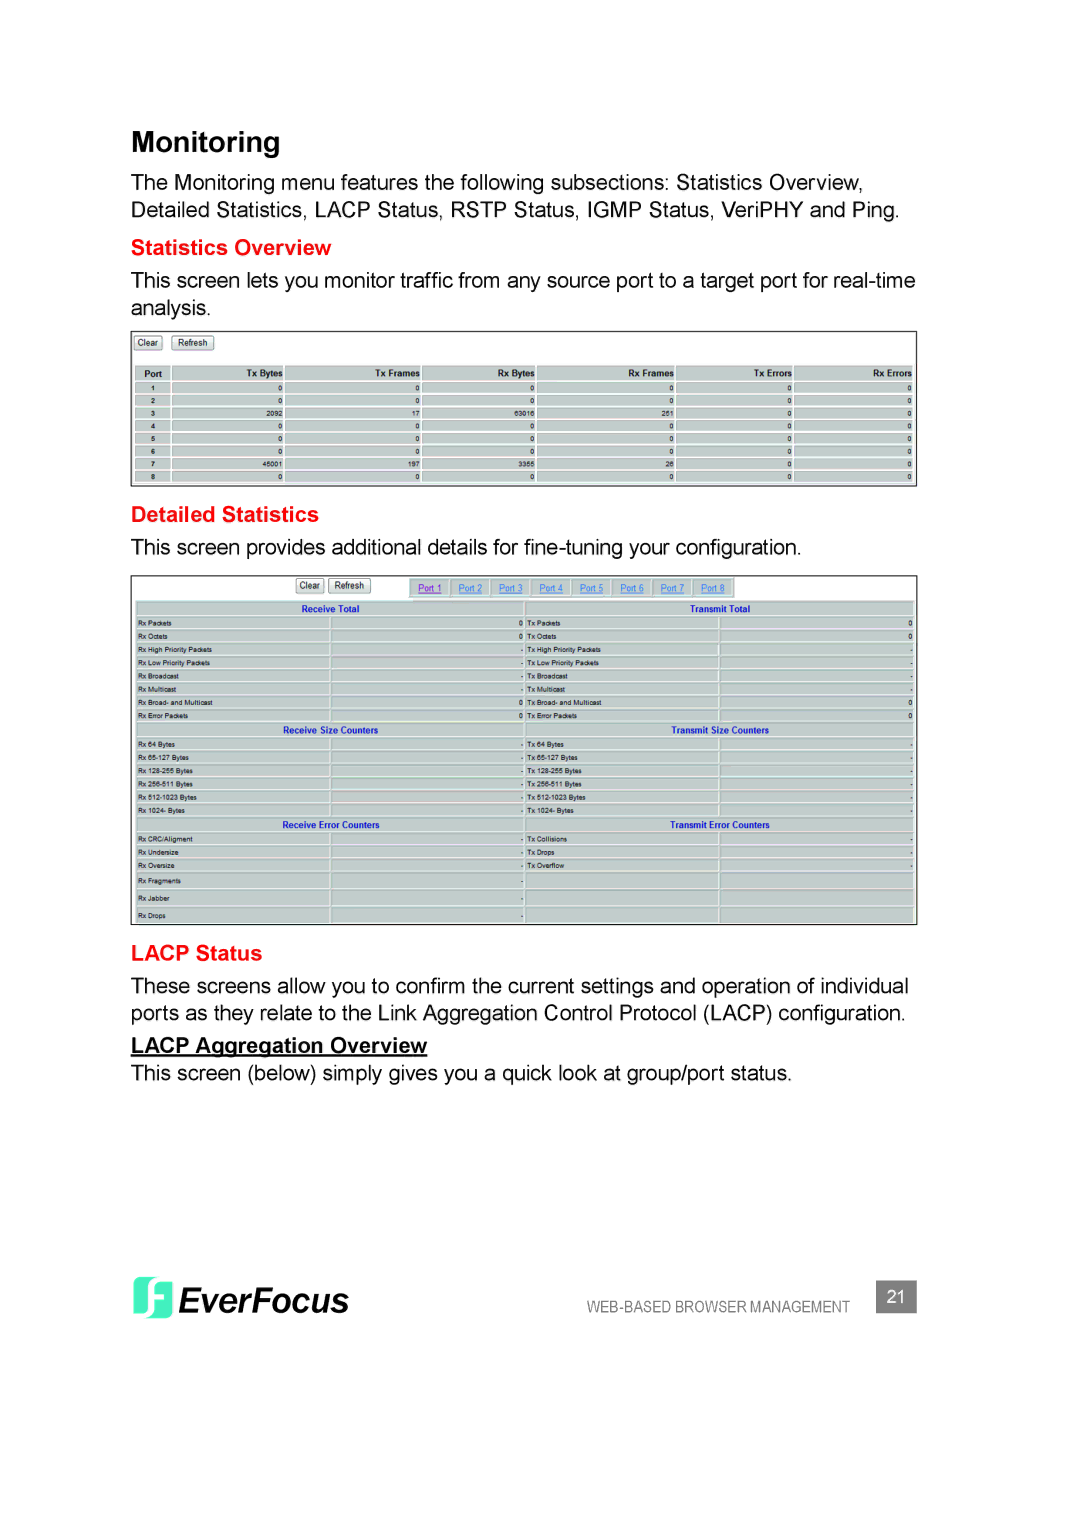 EverFocus ESM308T000D user manual Statistics Overview, Detailed Statistics, Lacp Status, Lacp Aggregation Overview 